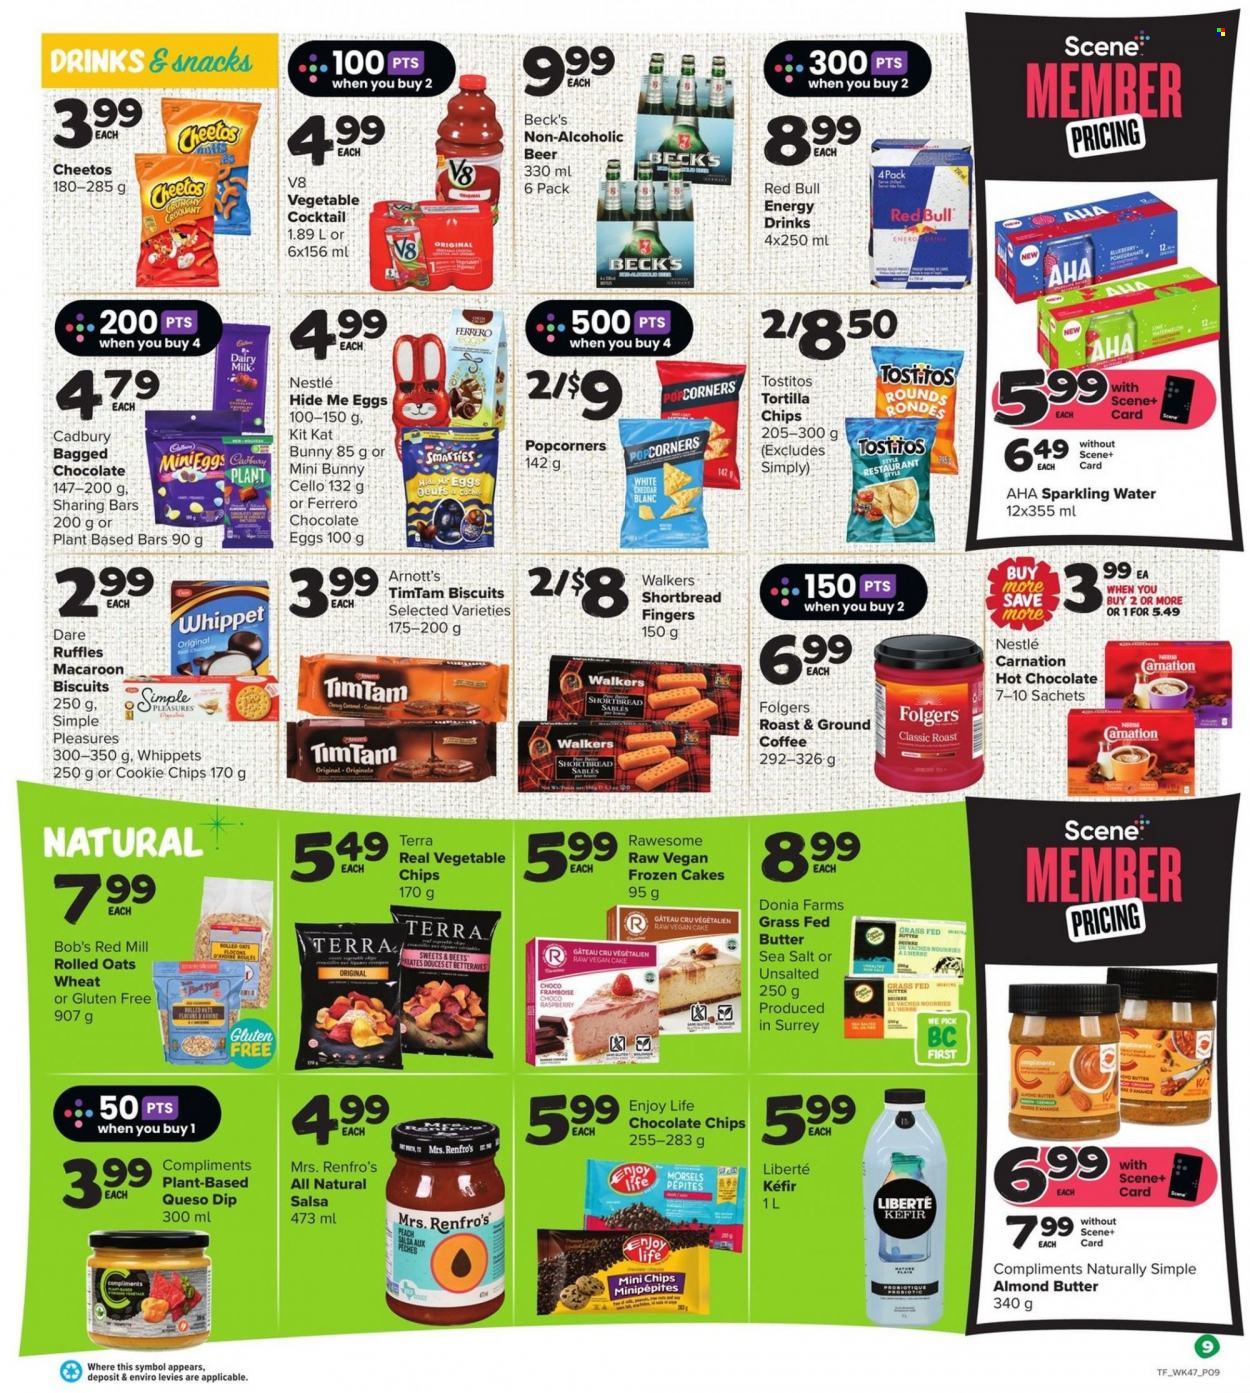 thumbnail - Thrifty Foods Flyer - March 23, 2023 - March 29, 2023 - Sales products - cake, roast, cheese, kefir, almond butter, dip, frozen cakes, KitKat, biscuit, Cadbury, Dairy Milk, chocolate egg, tortilla chips, Cheetos, popcorn, vegetable chips, Ruffles, Tostitos, oats, rolled oats, caramel, salsa, energy drink, Red Bull, sparkling water, water, hot chocolate, coffee, Folgers, ground coffee, beer, Beck's, Nestlé, Ferrero Rocher, Smarties. Page 14.